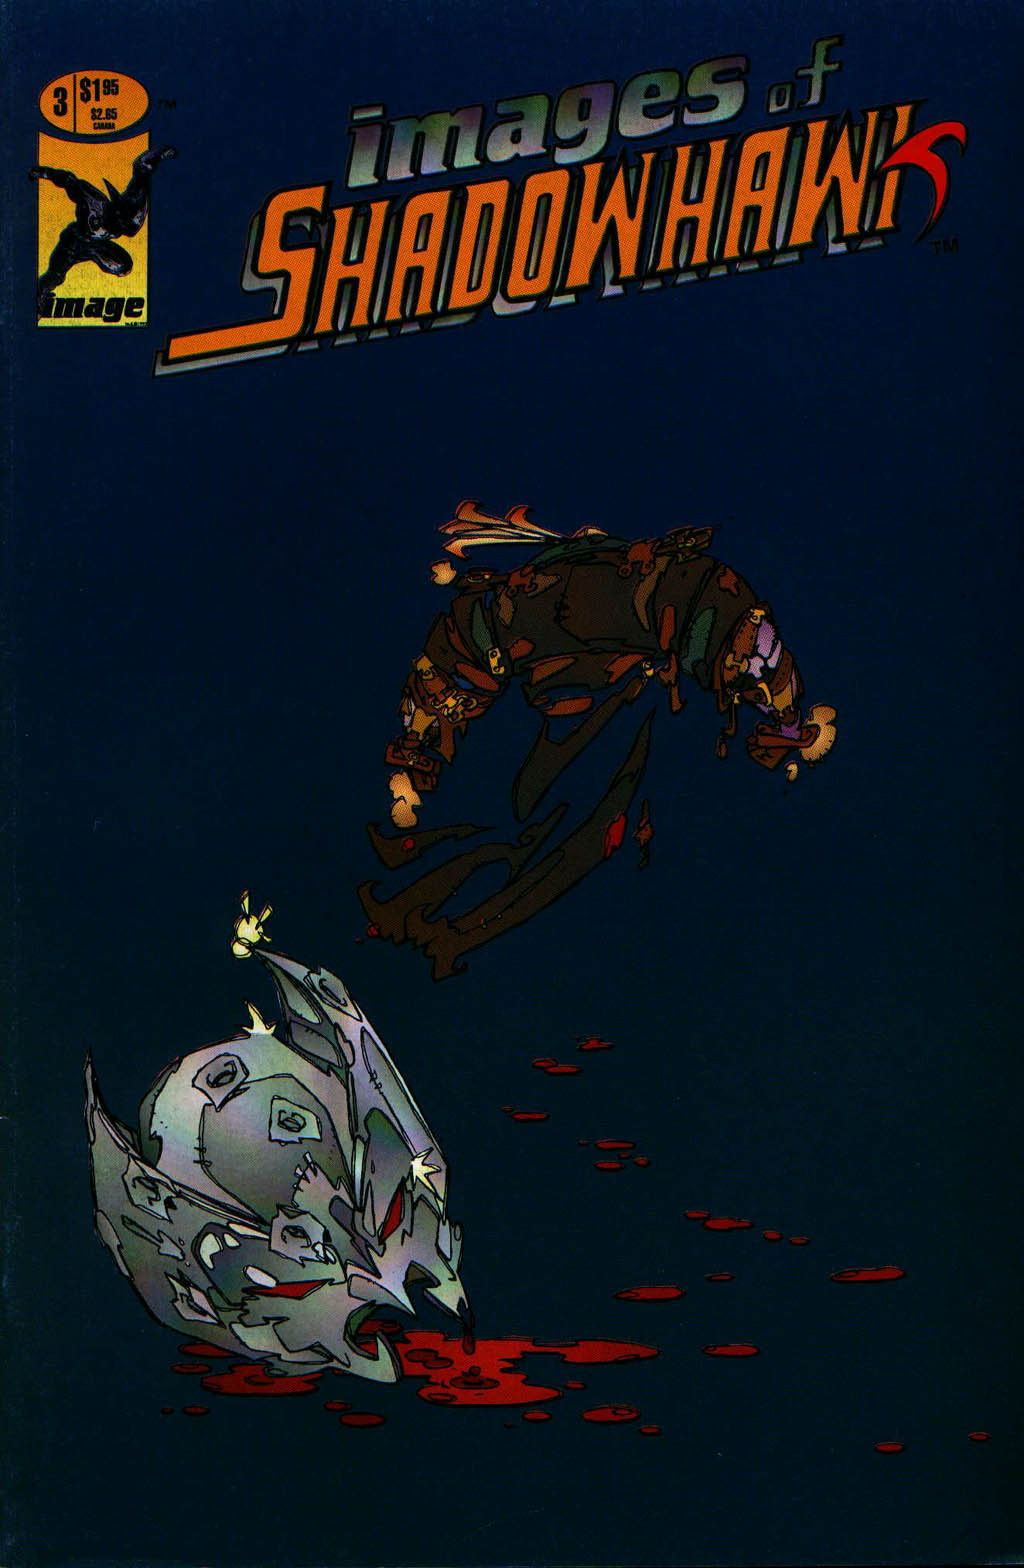 Read online Images of ShadowHawk comic -  Issue #3 - 1